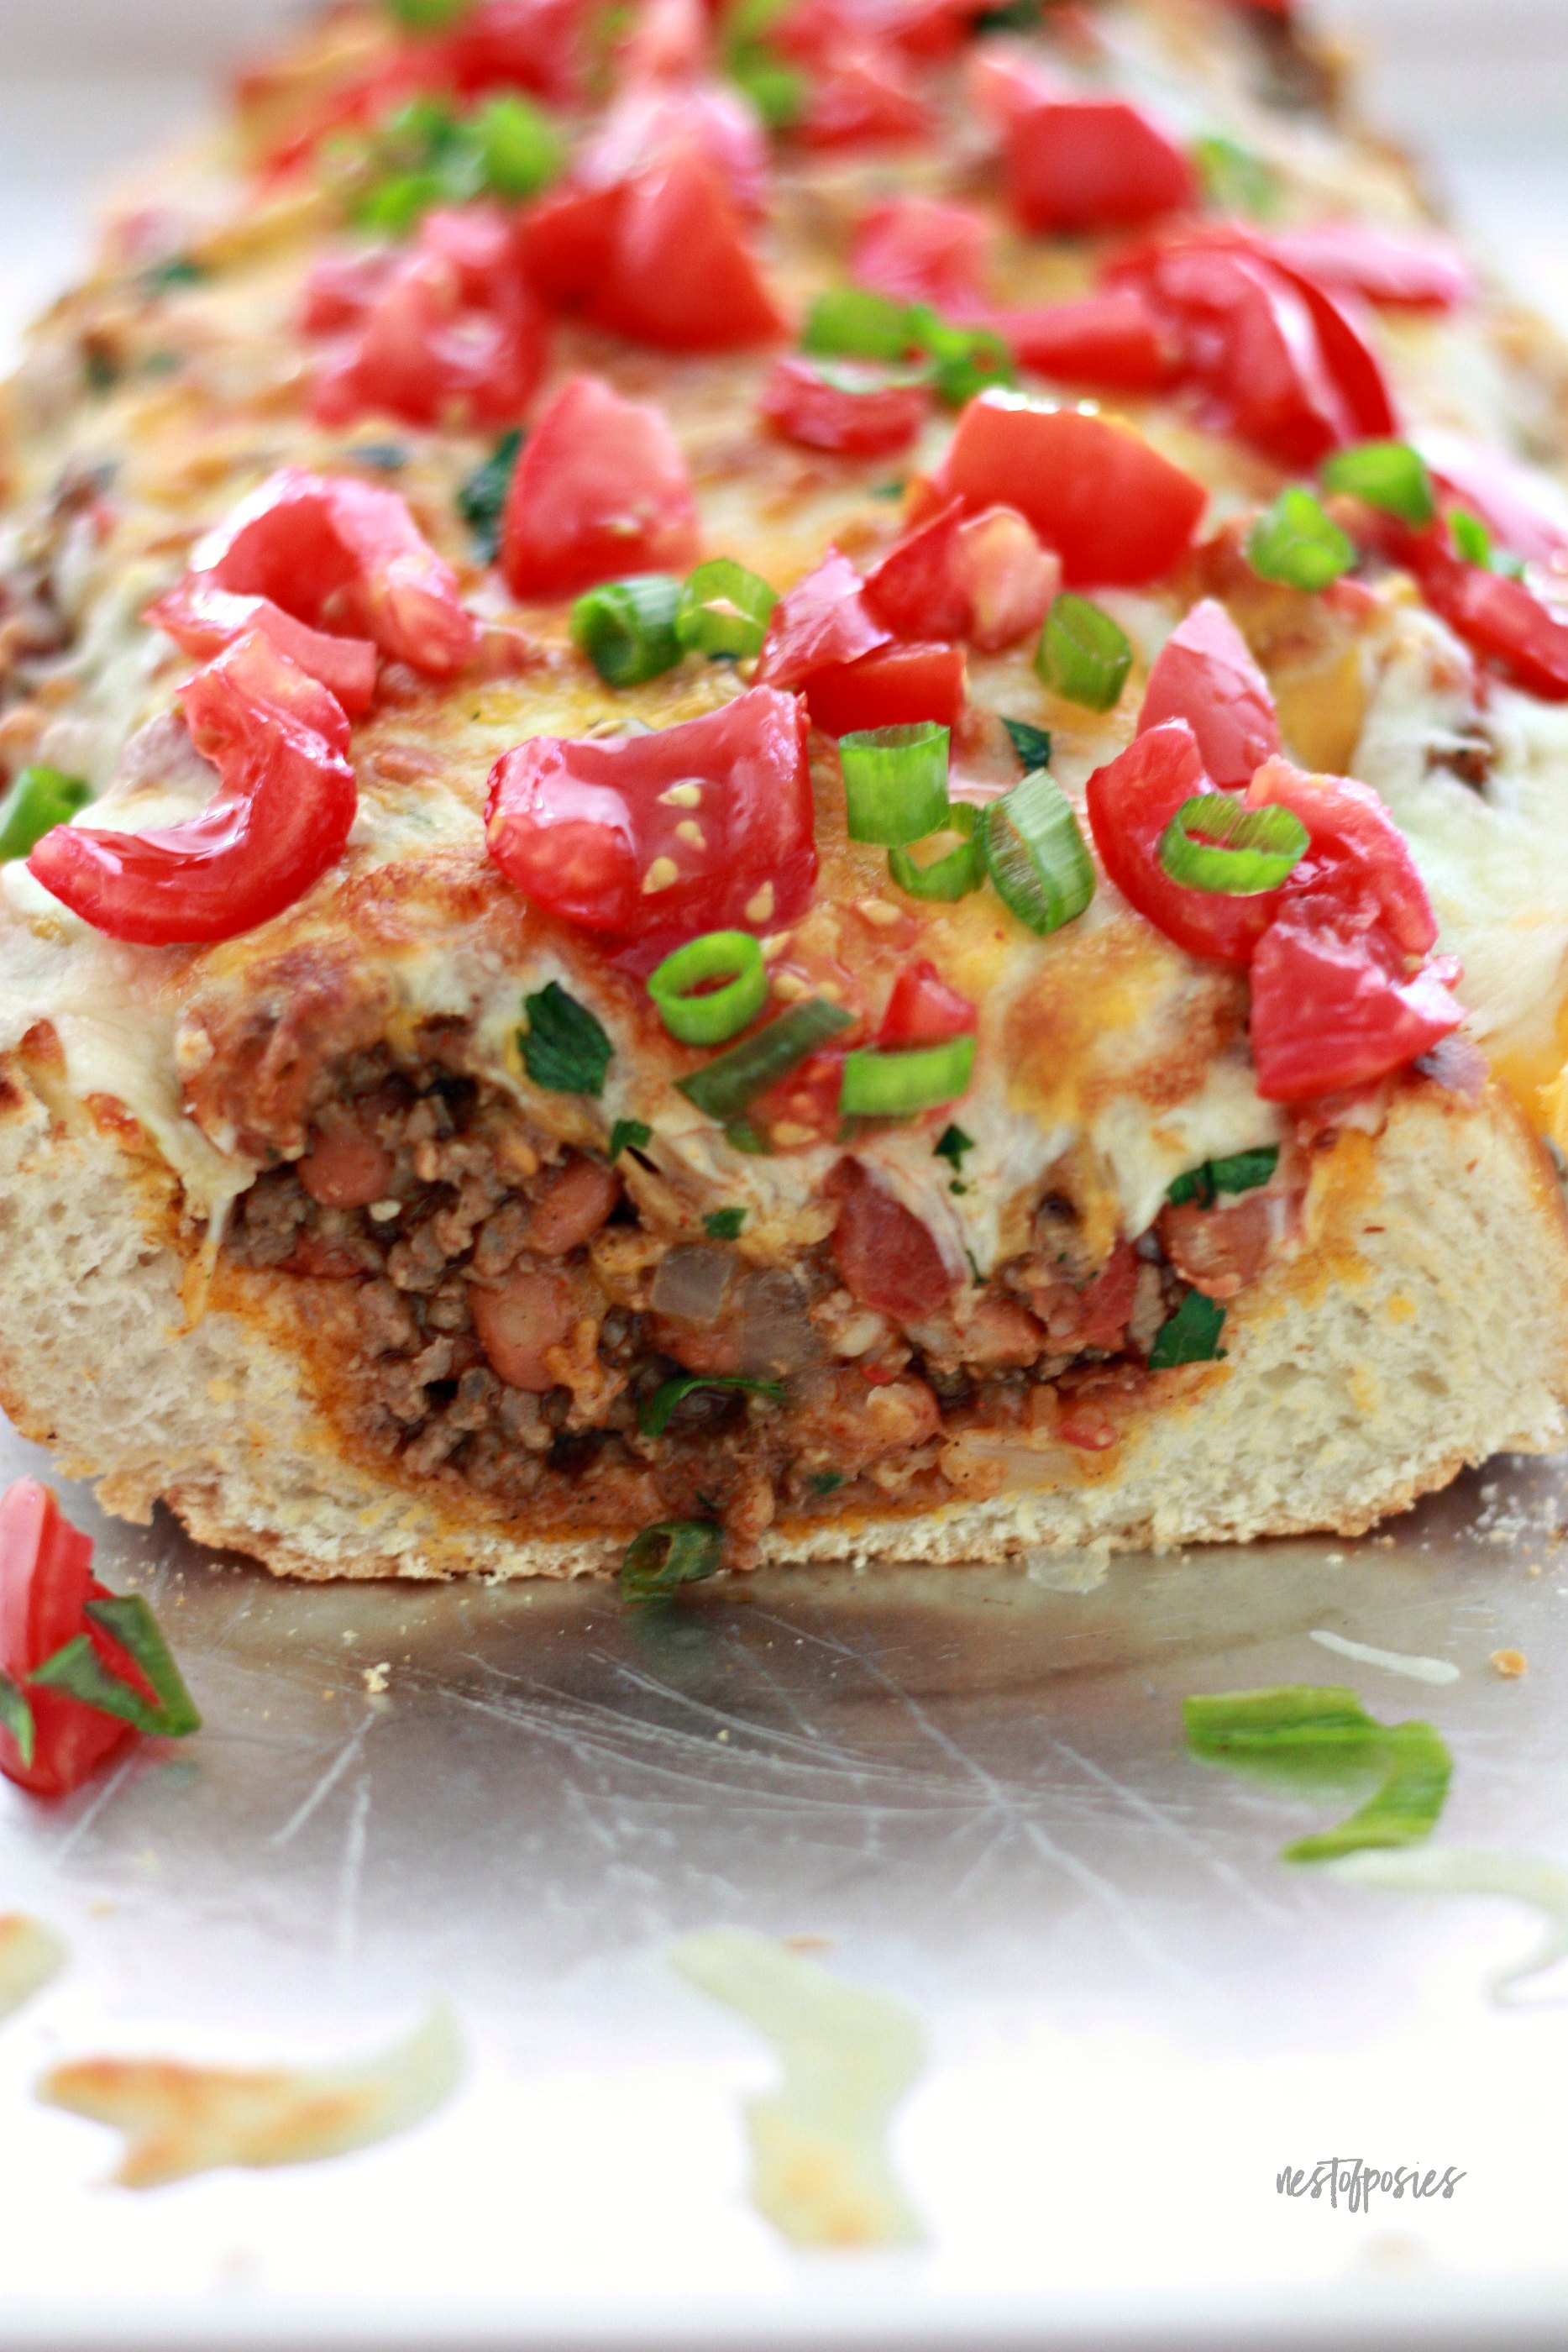 Incredible Stuffed Chili Bread! Perfect for Fall & tailgating